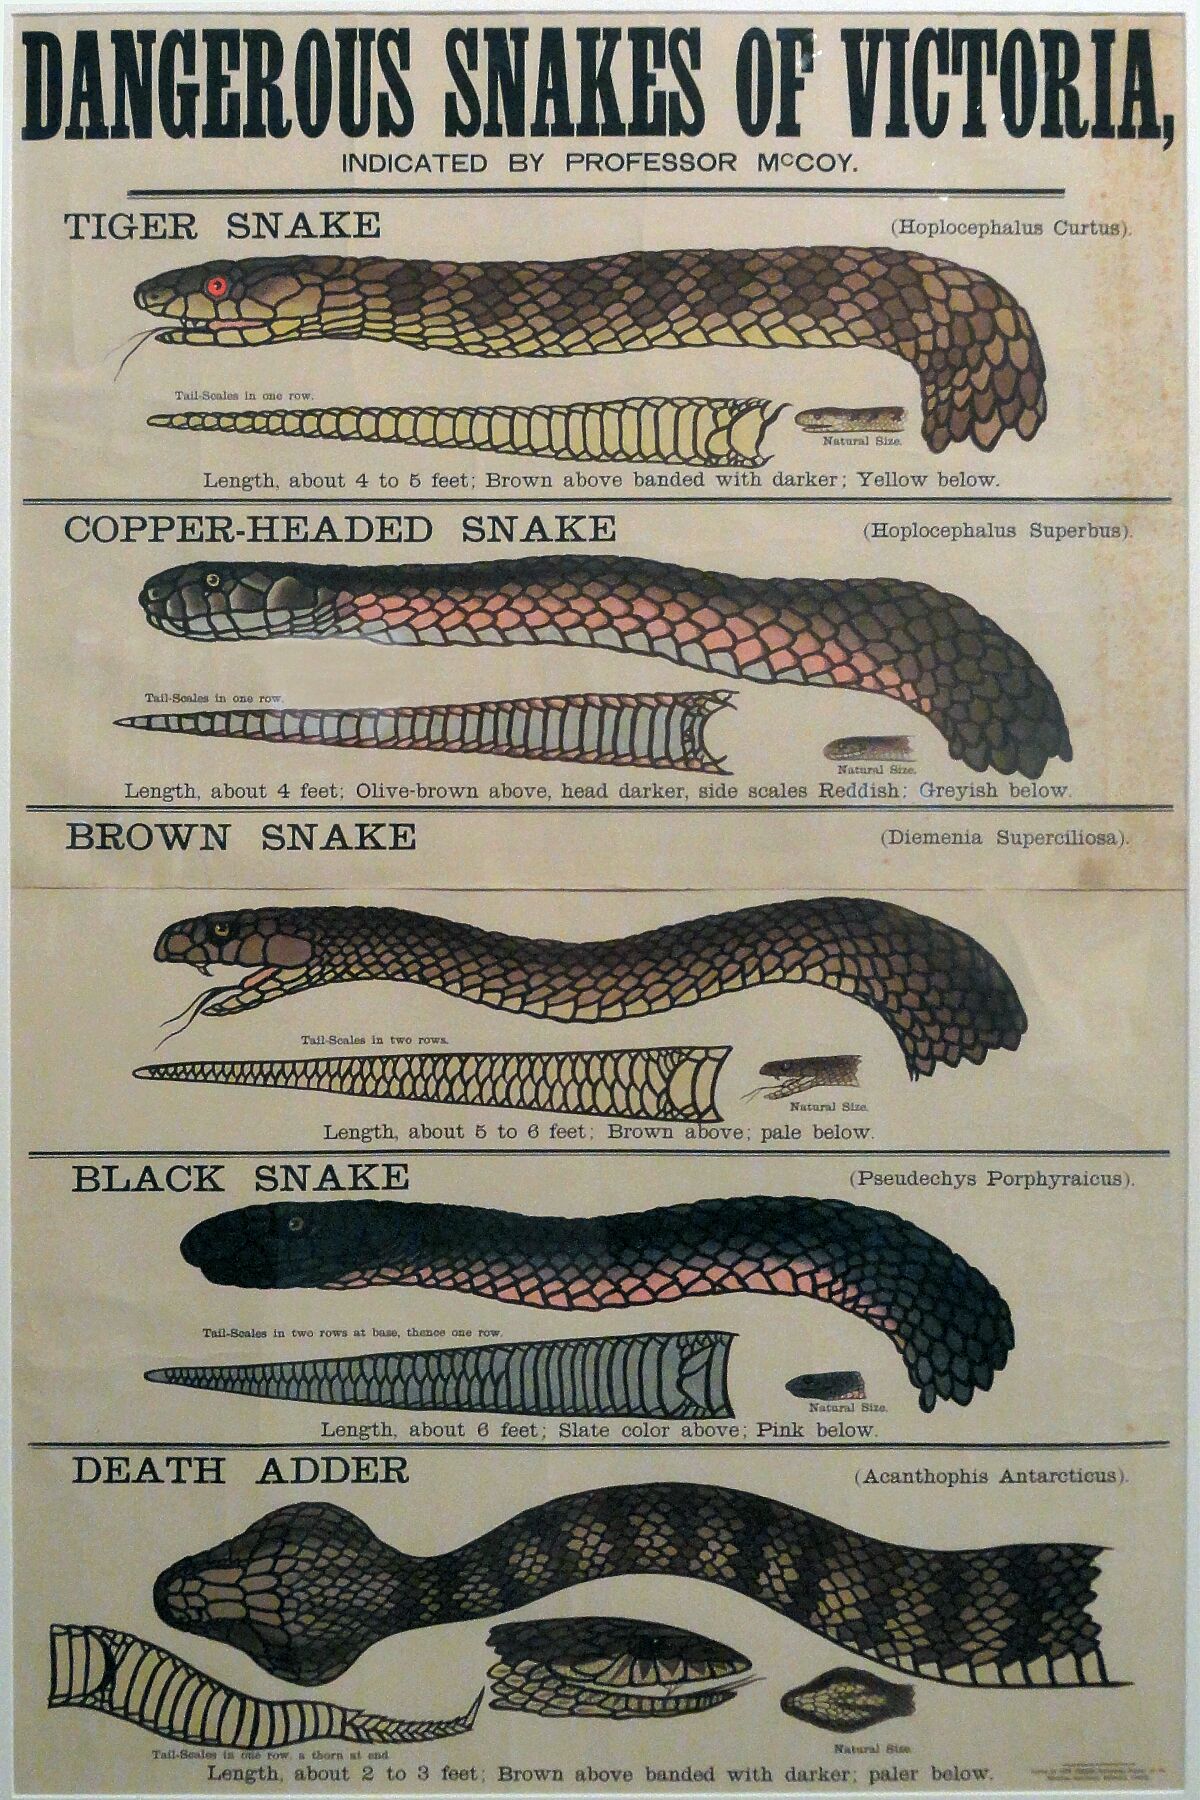 Dangerous Snakes of Victoria - 1877